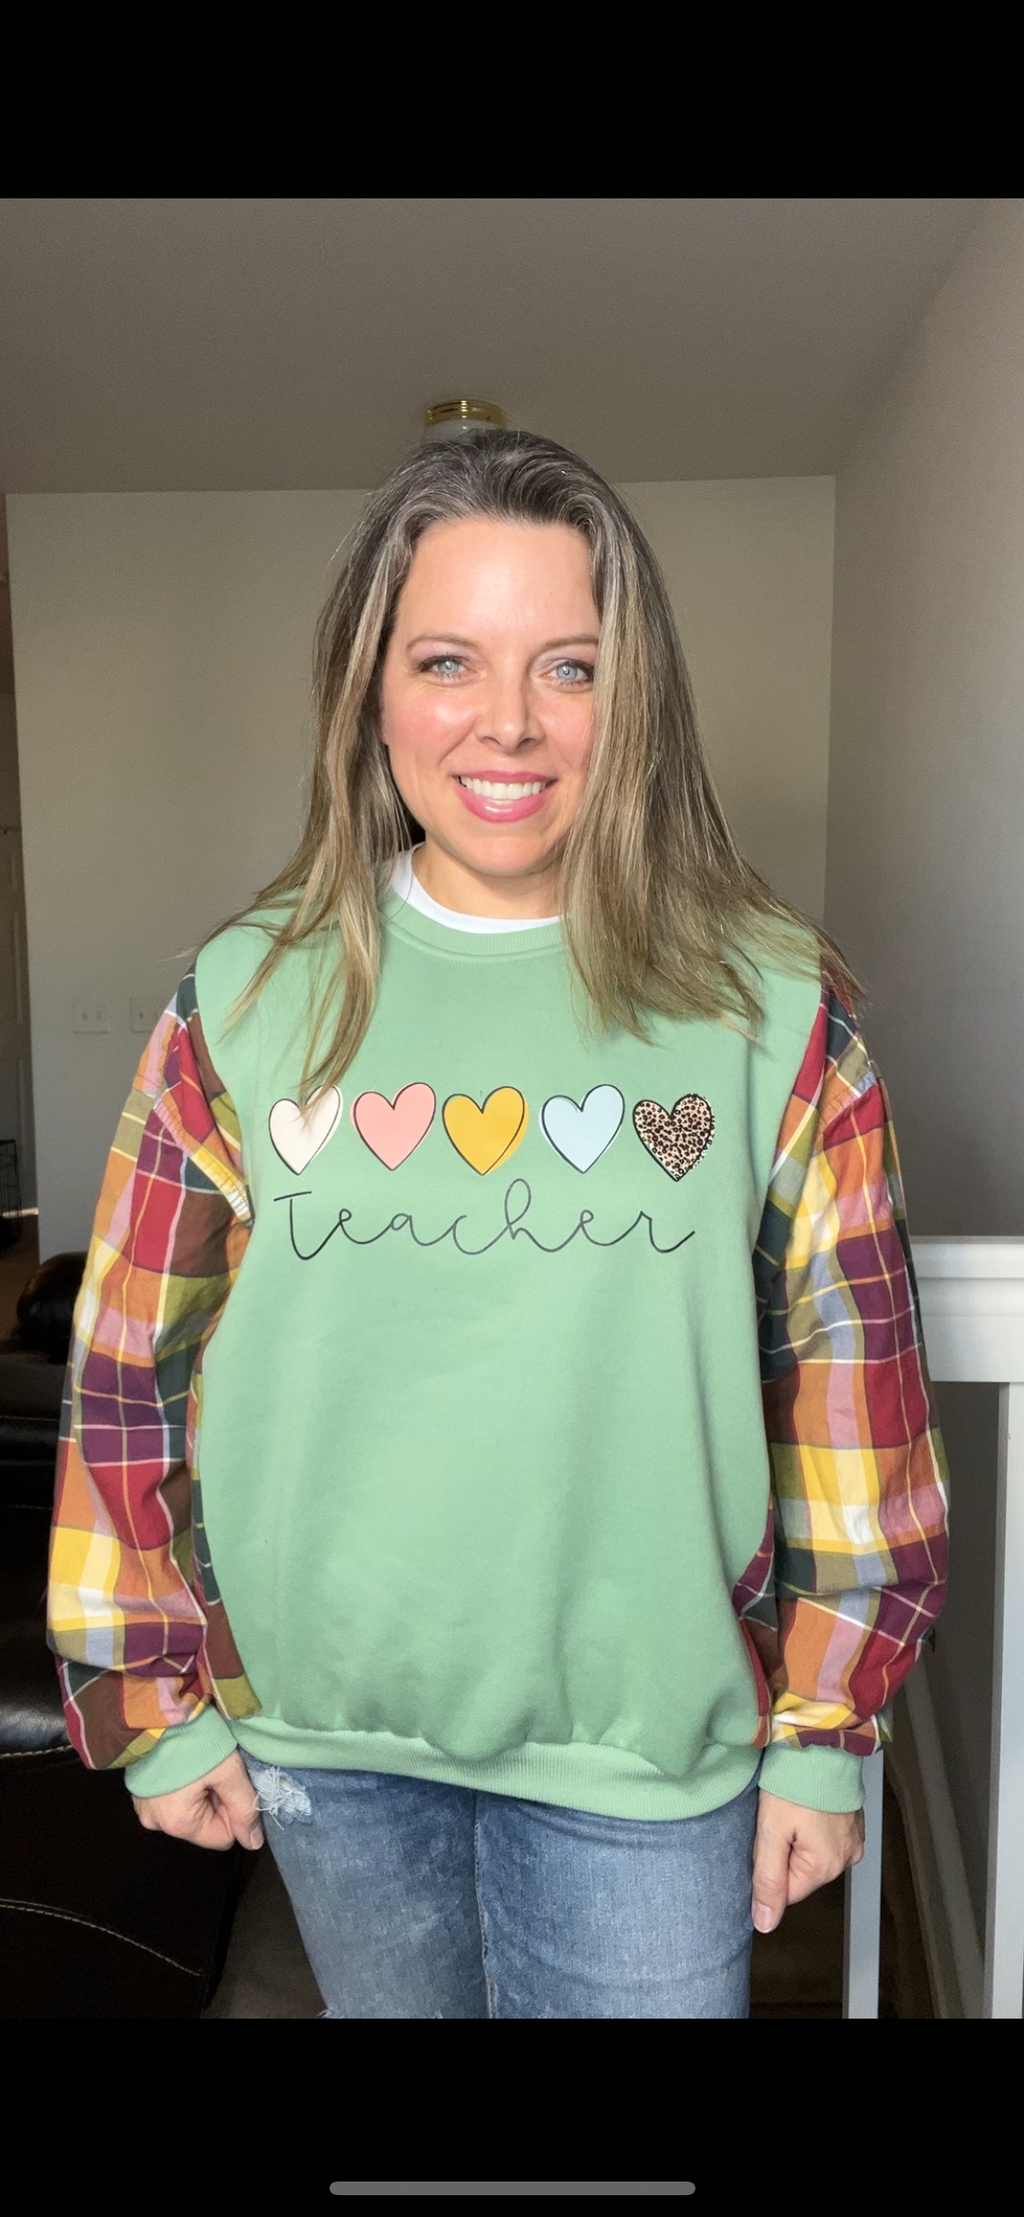 Upcycled Teacher – women’s large – midweight sweatshirt with flannel sleeves ￼